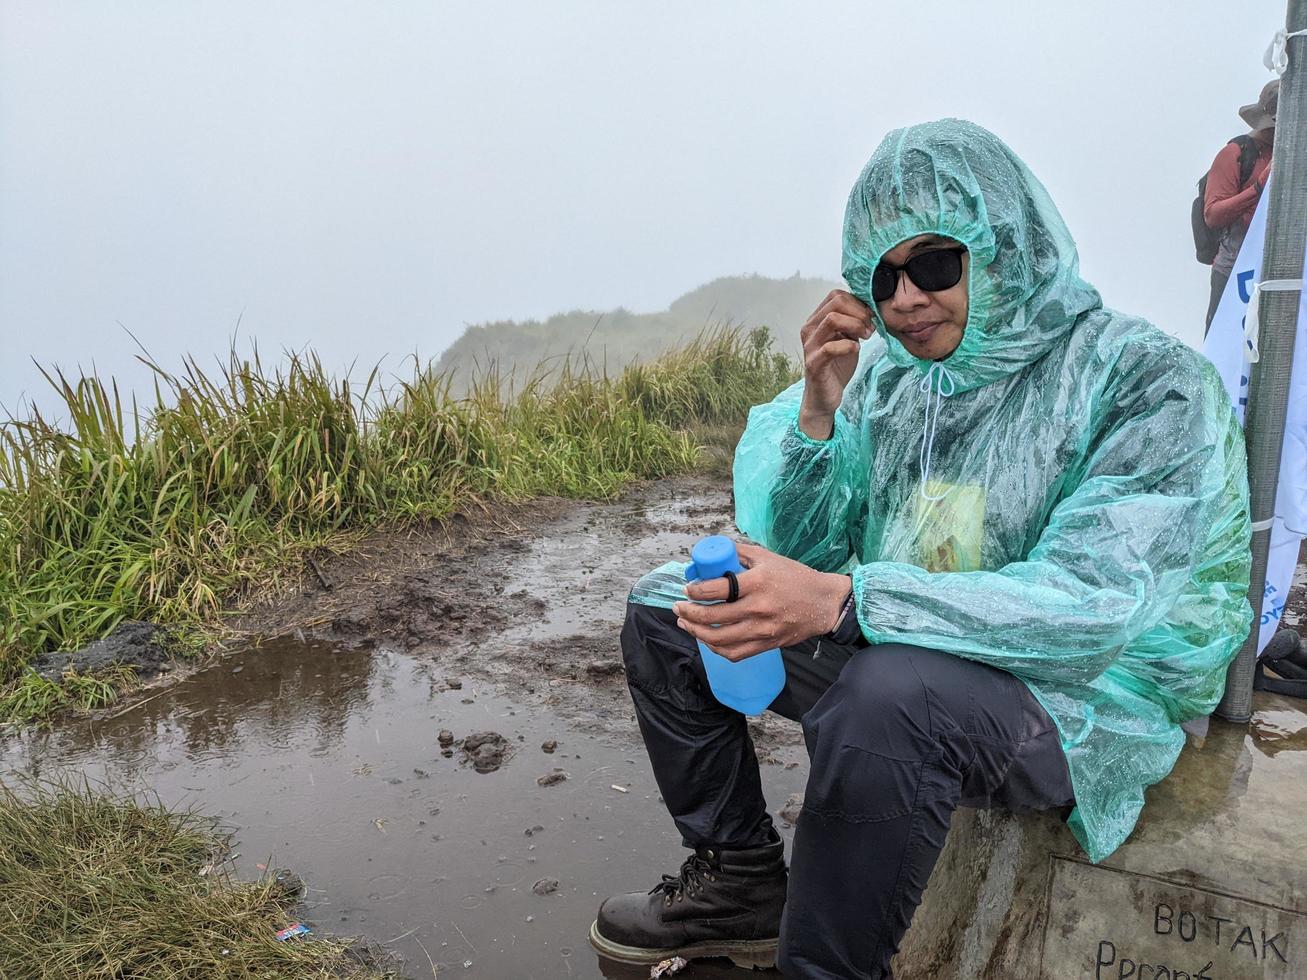 Man reach peak of mountain when rainy day with foggy vibes. The photo is suitable to use for adventure content media, nature poster and forest background.